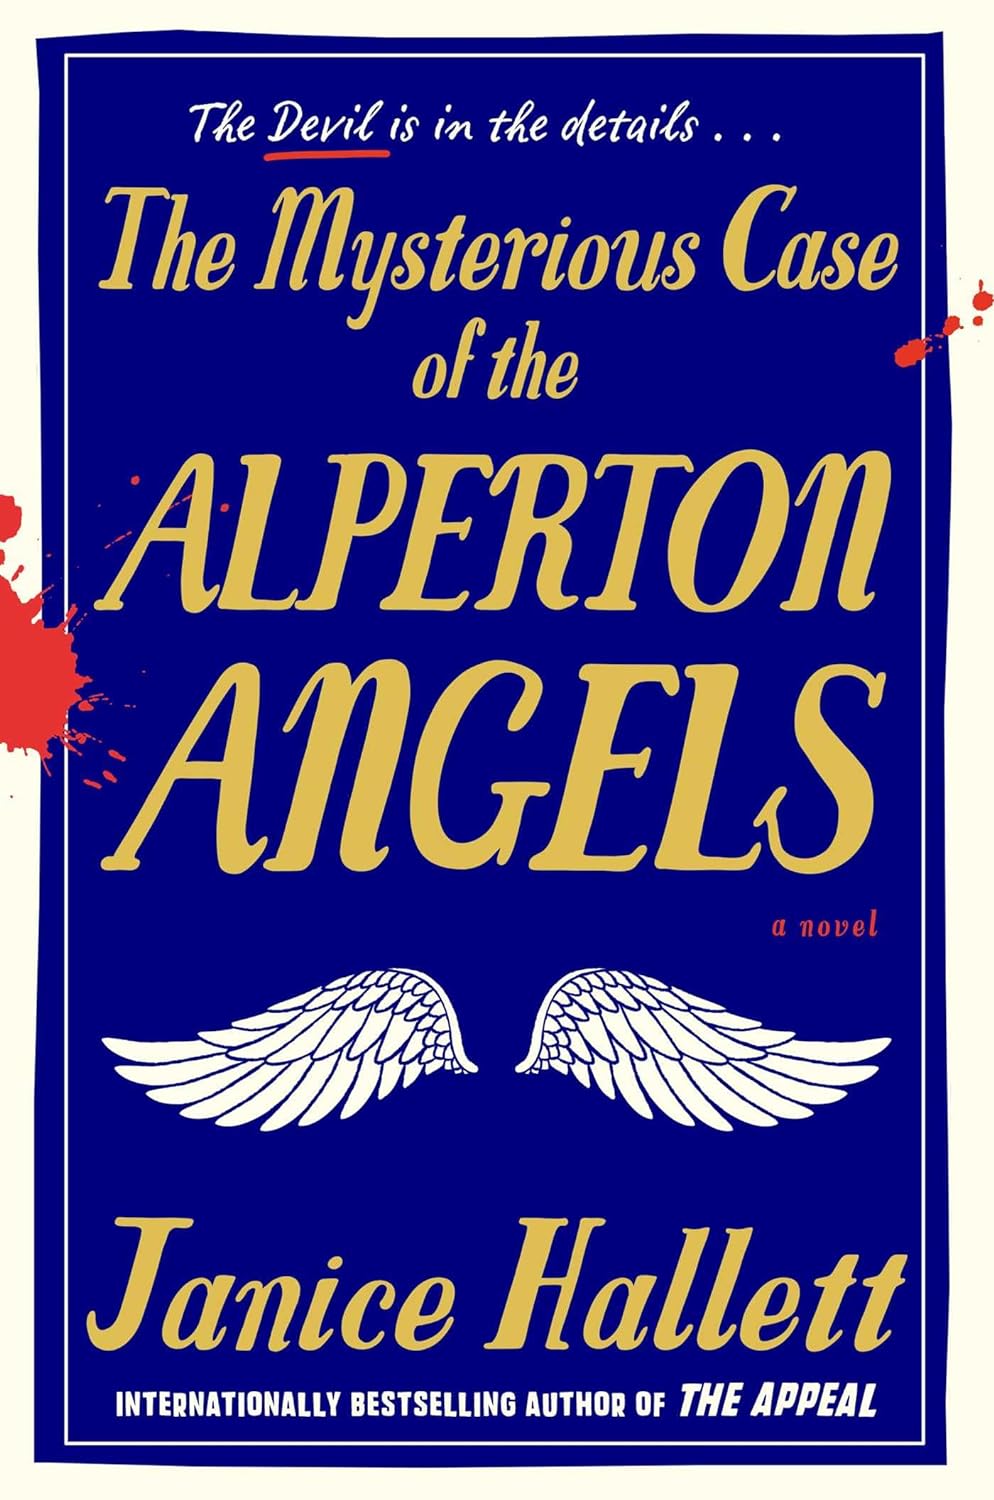 Image for "The Mysterious Case of the Alperton Angels"